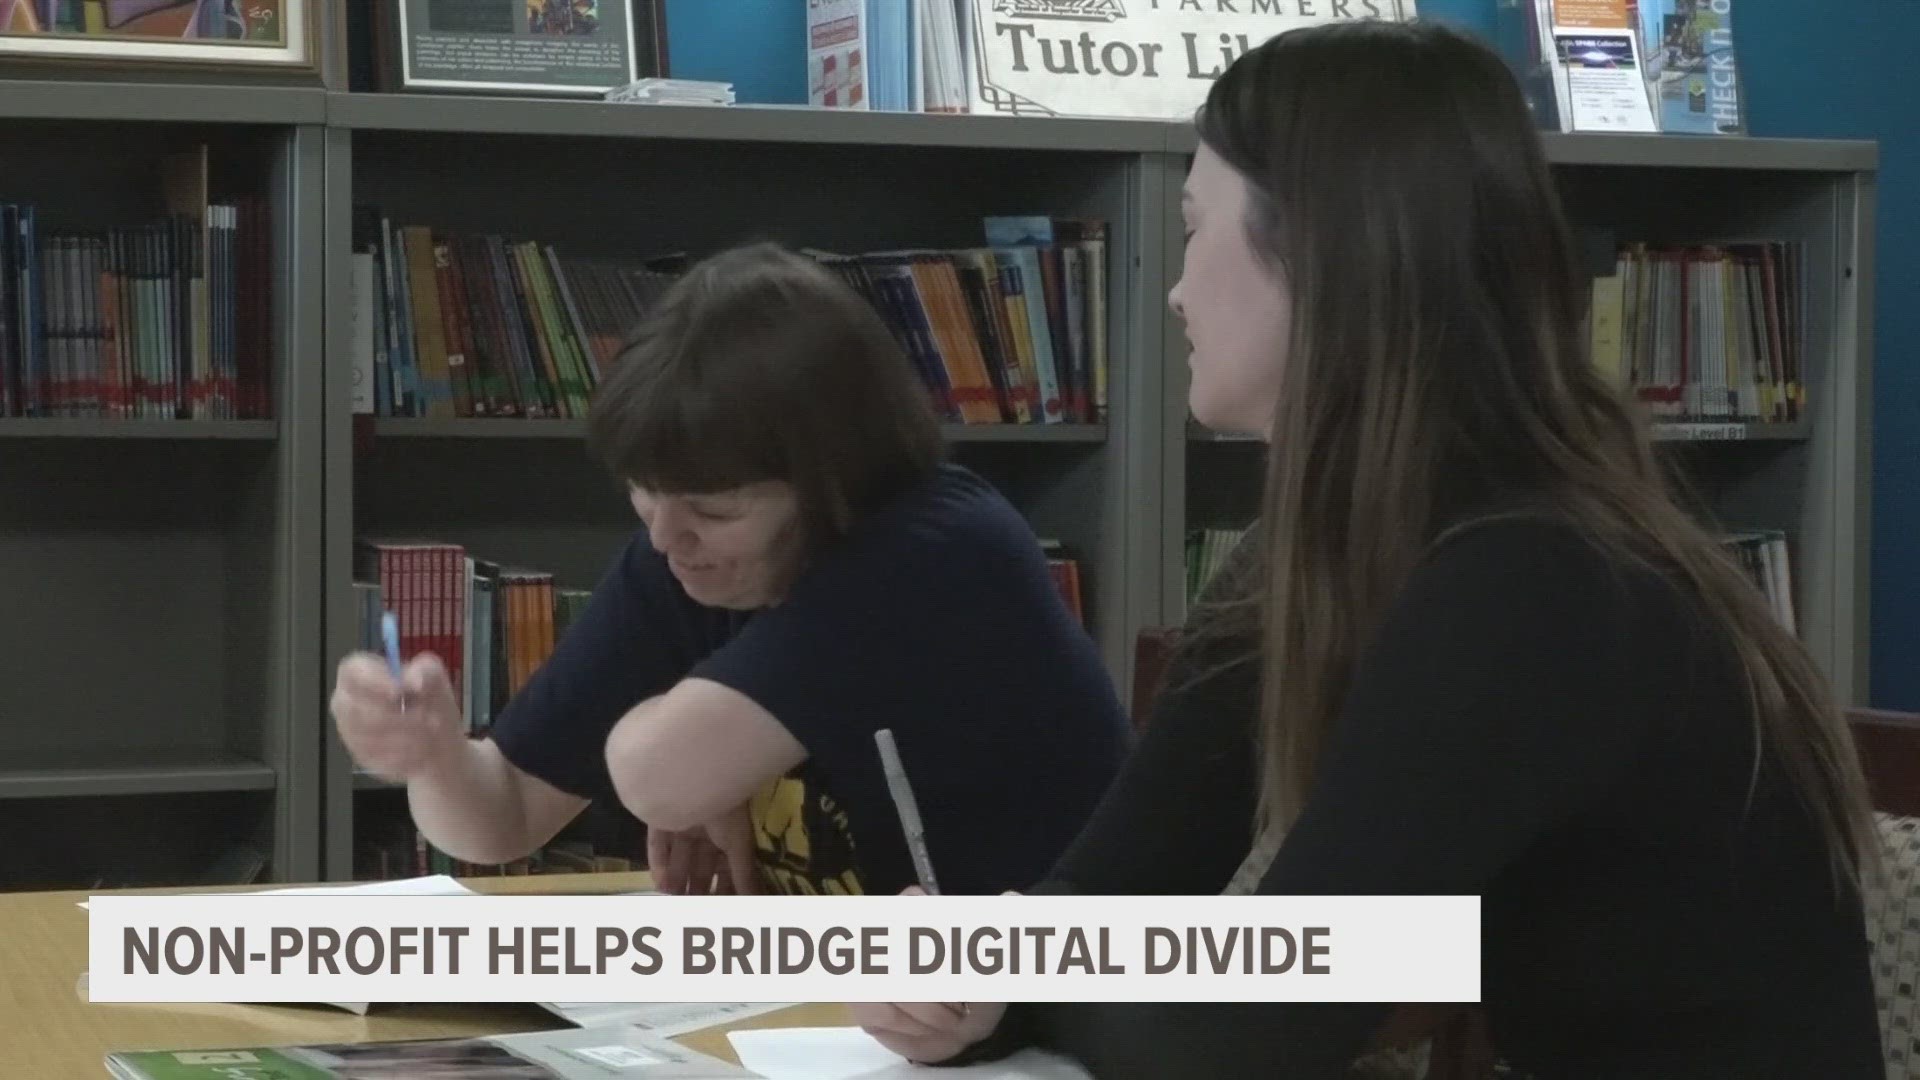 The Literacy Center has been awarded nearly $200,000 to help bridge the digital divide for residents without internet access.